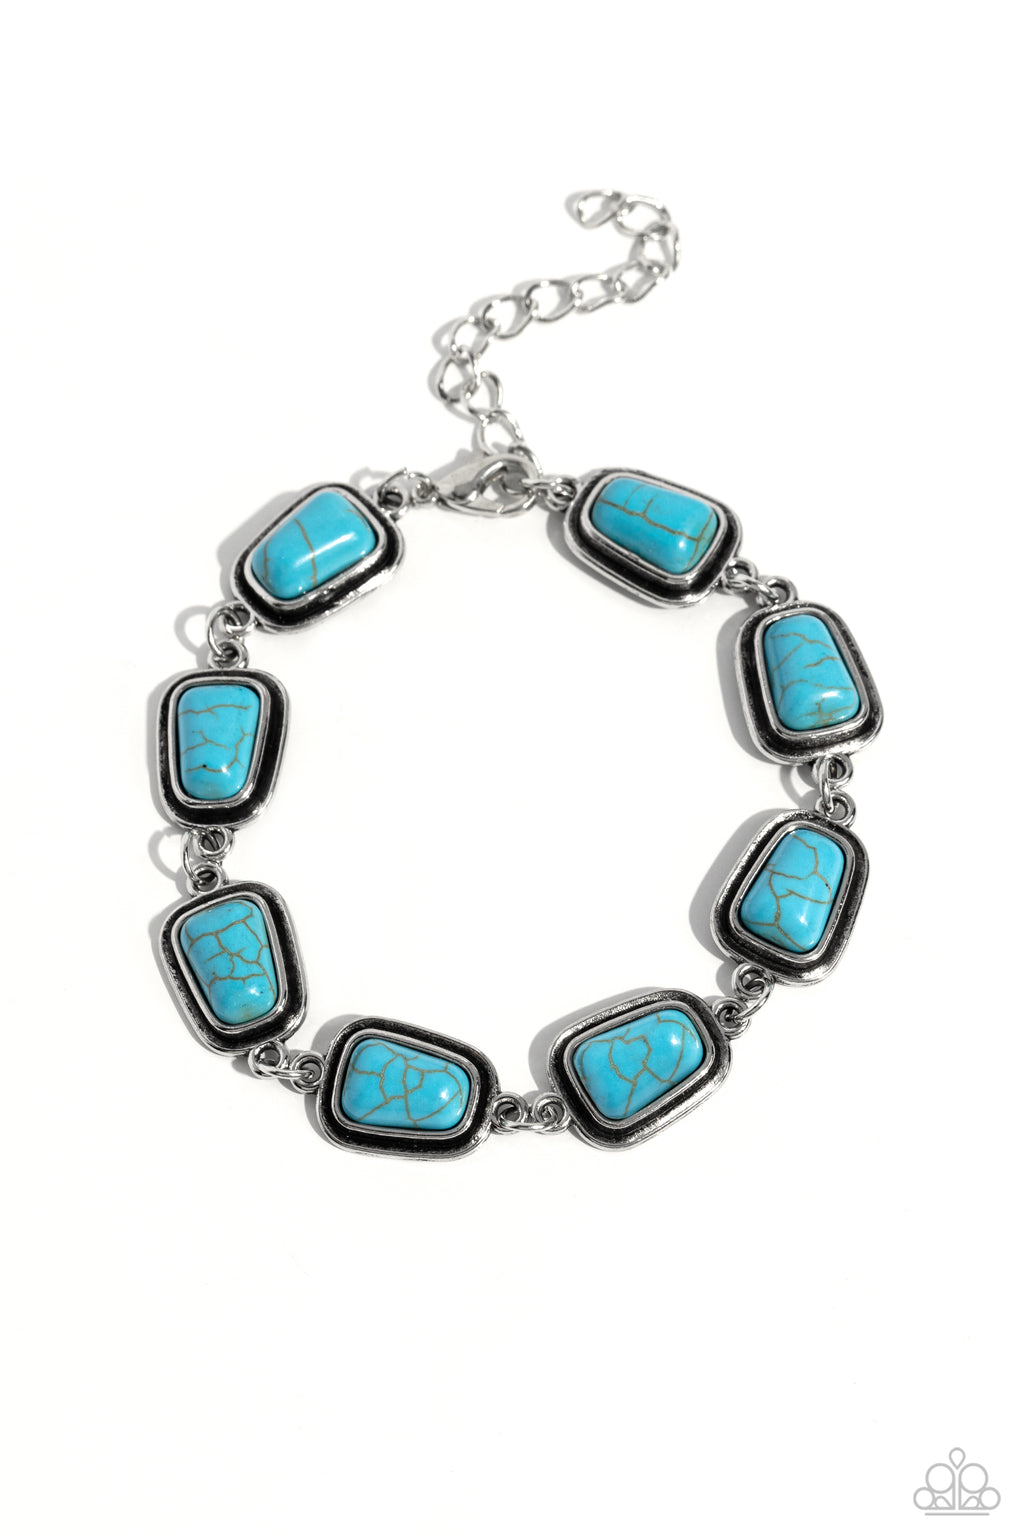 five-dollar-jewelry-chasing-canyons-blue-bracelet-paparazzi-accessories